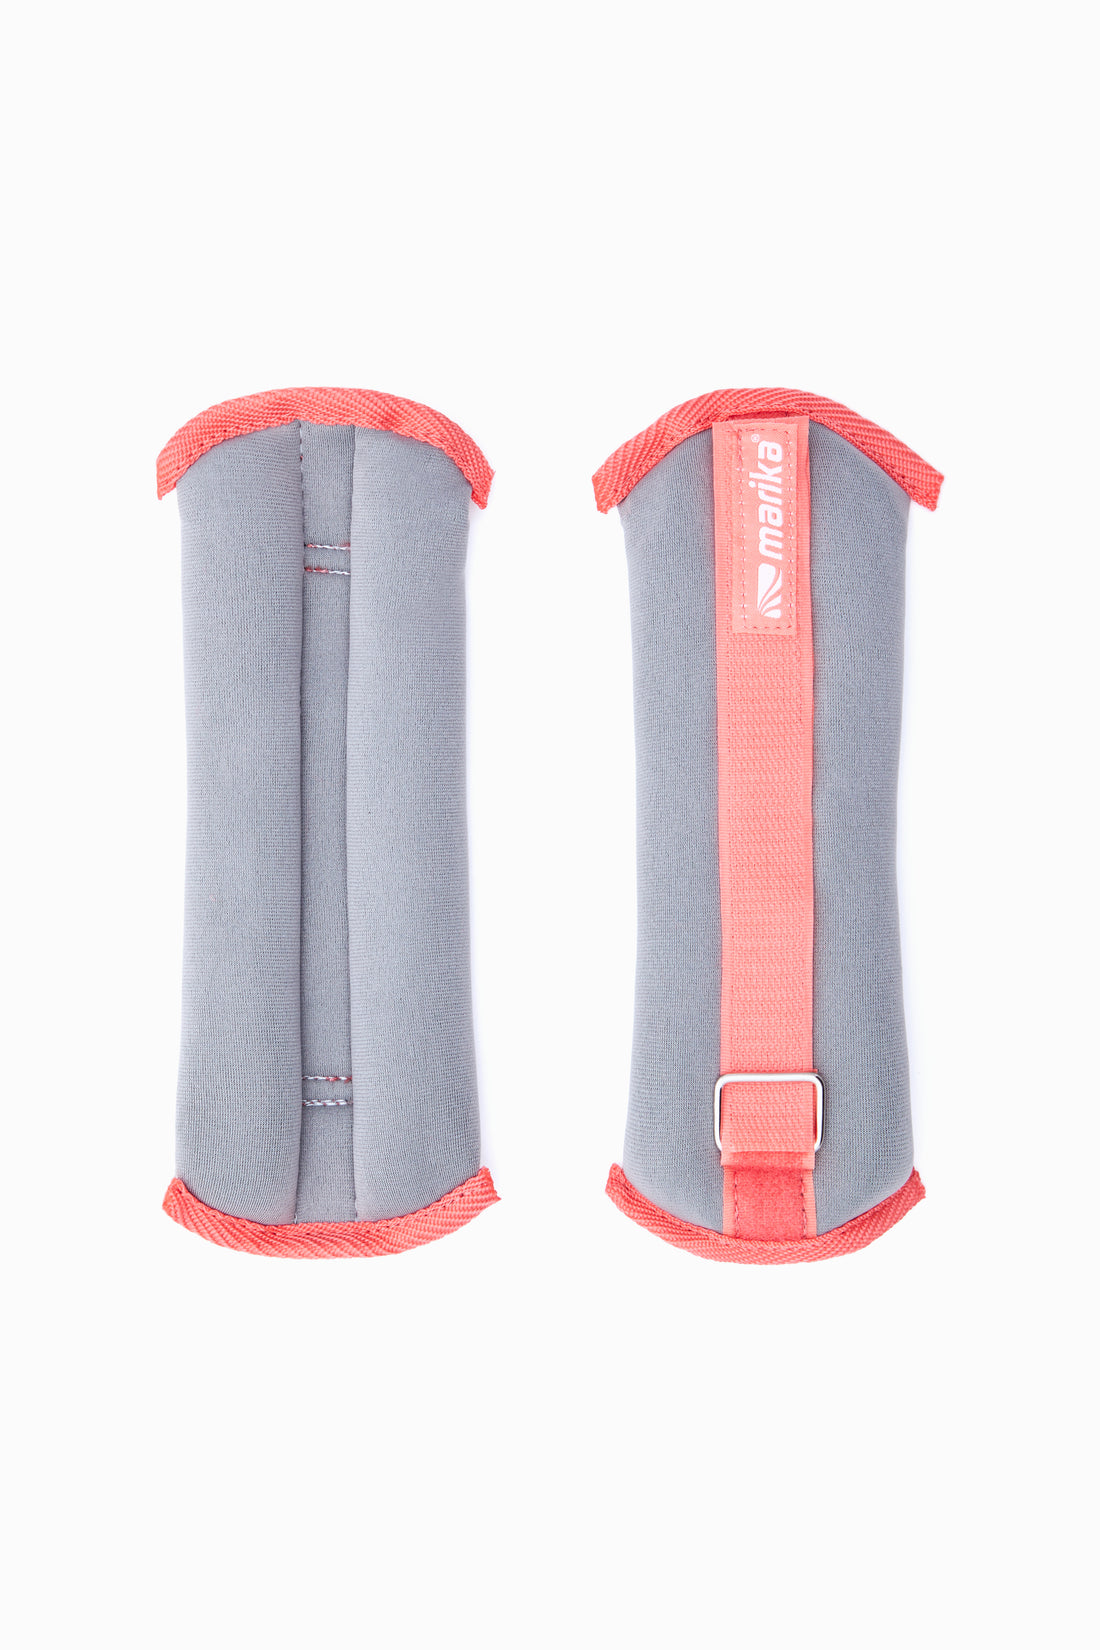 2LB Pair Ankle Weight (Coral/Grey)